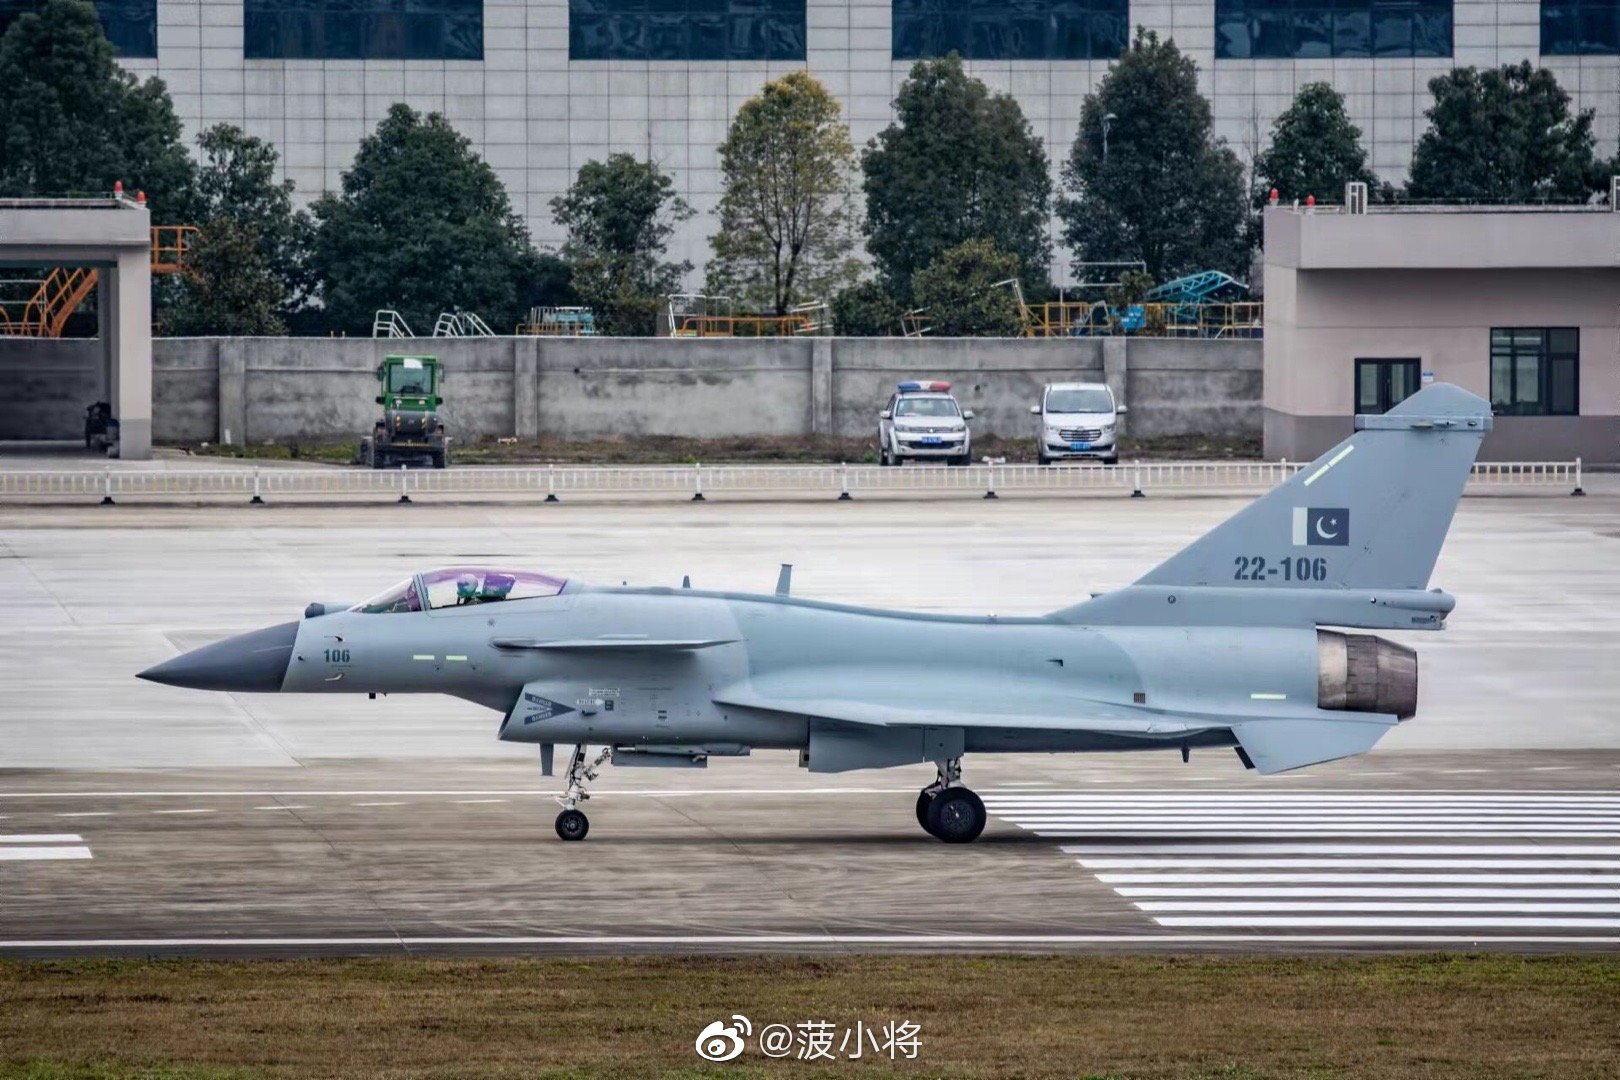 Rupprecht_A on Twitter: "So far the best images of a Pakistani Dragon: 🐉 J-10CP - even as it seems, they are still designated J-10C only ;-) - serial number 22-106! (Image via